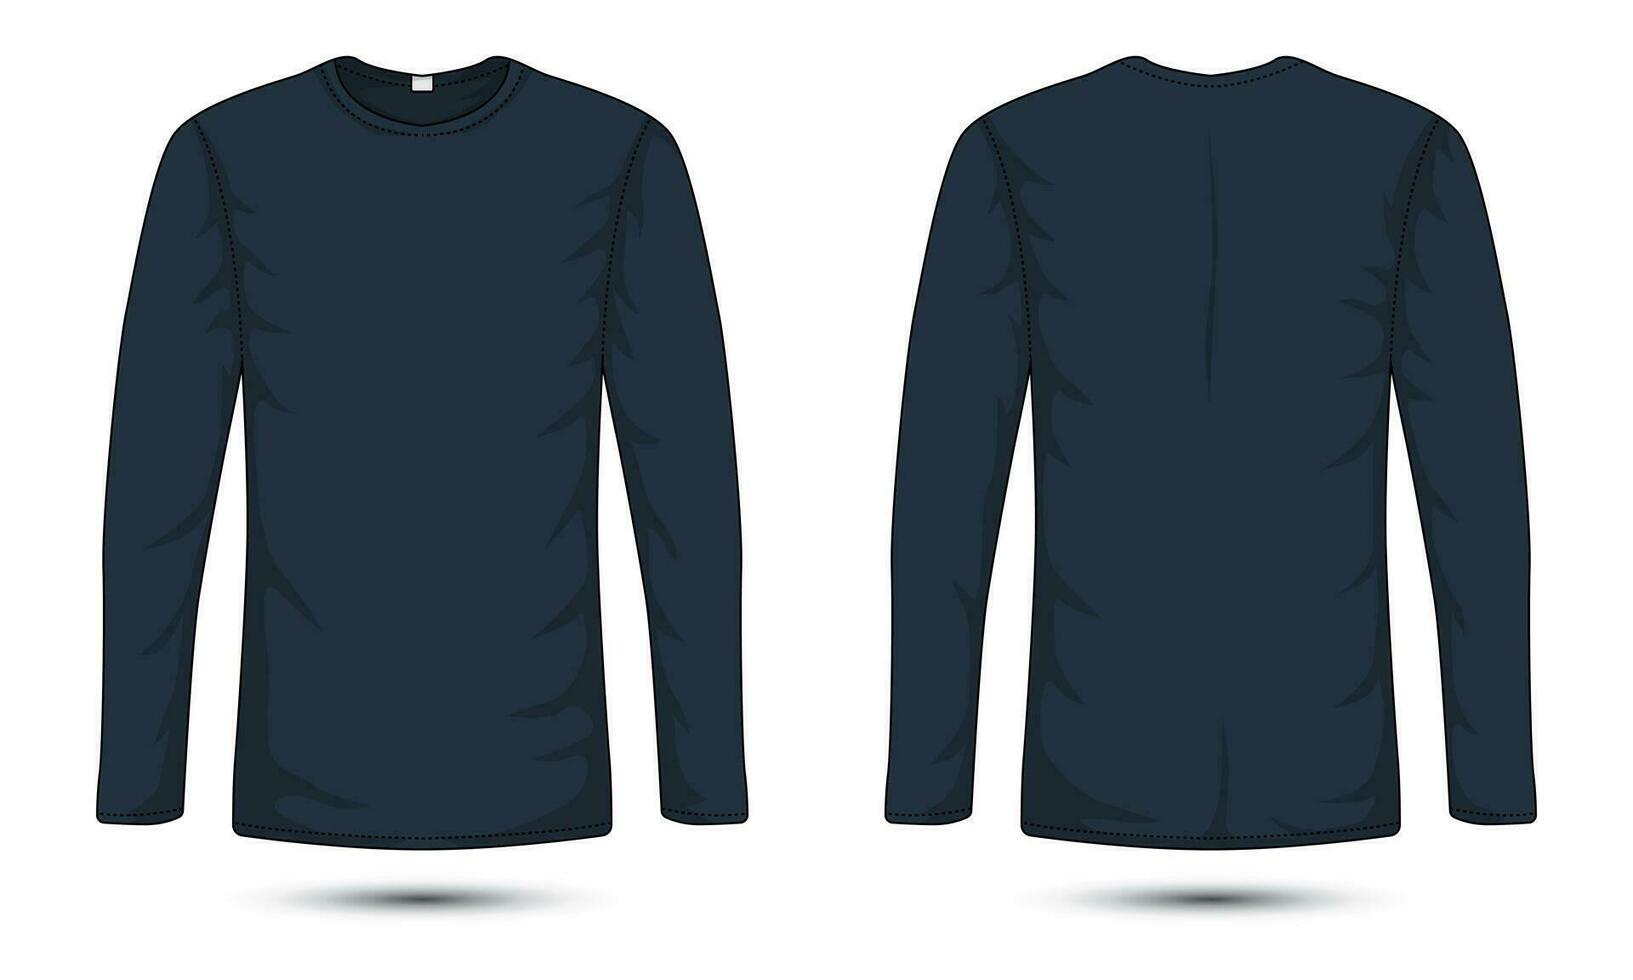 Long sleeve navy blue T-shirt mockup with front and back view vector